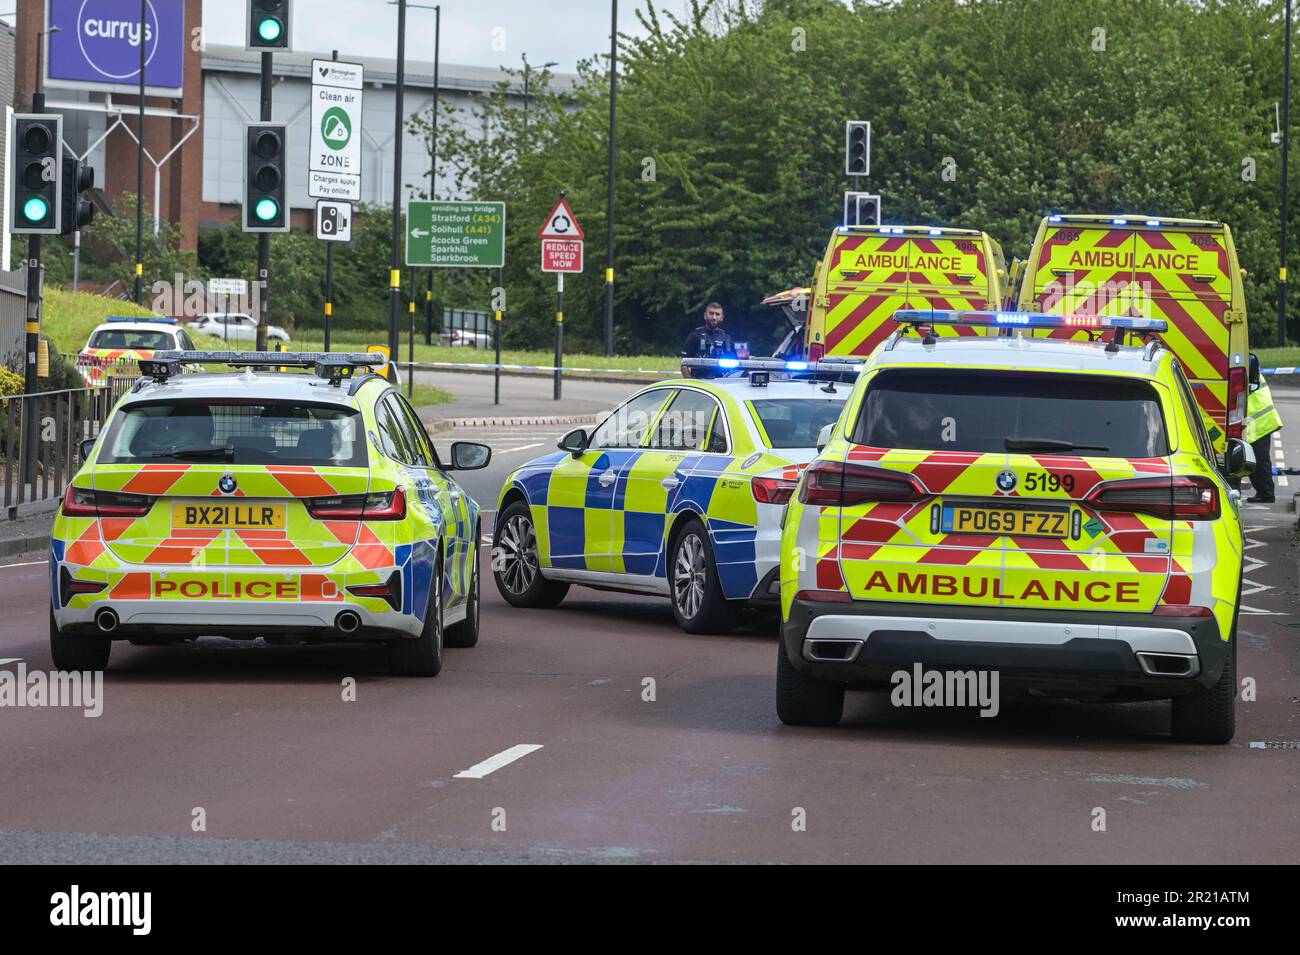 Belgrave Middleway, Birmingham, 16th May 2023 - A man has died after he was hit by a vehicle whilst crossing a major road through Birmingham city centre on Tuesday afternoon. Paramedics worked on the cyclist but he was declared dead at the scene. West Midlands Police closed both sides of Belgrave Middleway which is a 3-lane ring road through the city centre, causing traffic gridlock as officers investigate the mans death. West Midlands Police said at the time: 'We are currently dealing with a serious collision on Belgrave Middleway between the junctions of Horton Square and Haden Circus. 'The Stock Photo